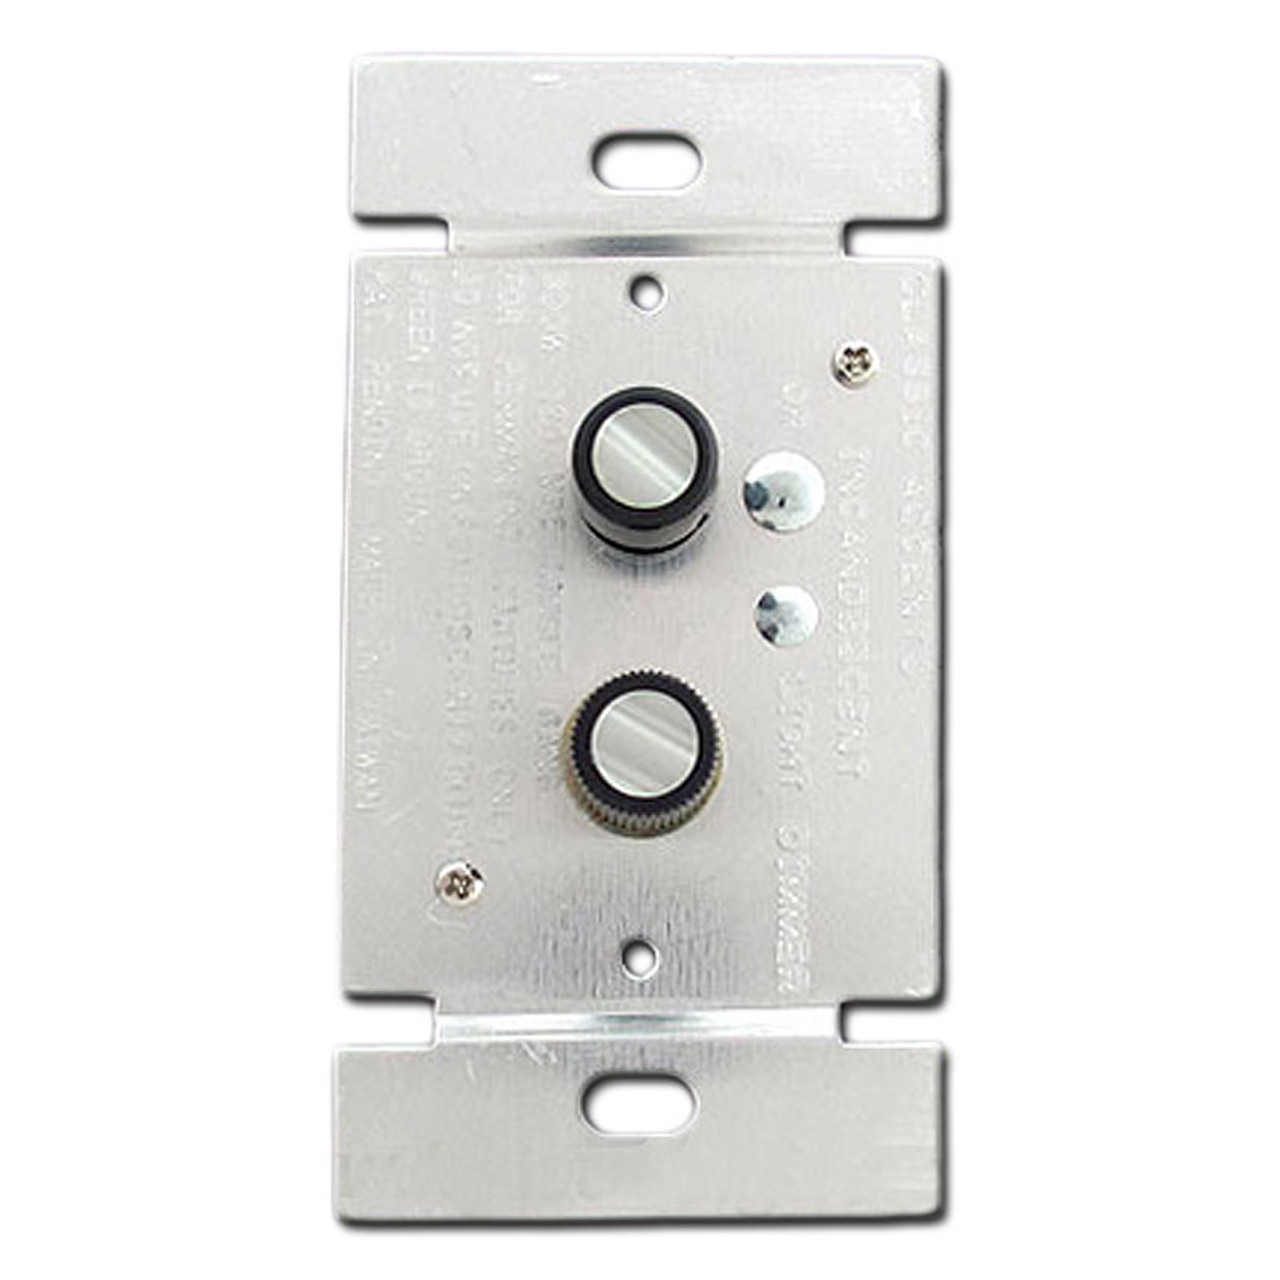 https://cdn11.bigcommerce.com/s-wlejmk/images/stencil/1280x1280/products/1159/1018/push-buttons-dimmers-3-way-300w-s93dm__89984.1351360188.jpg?c=2